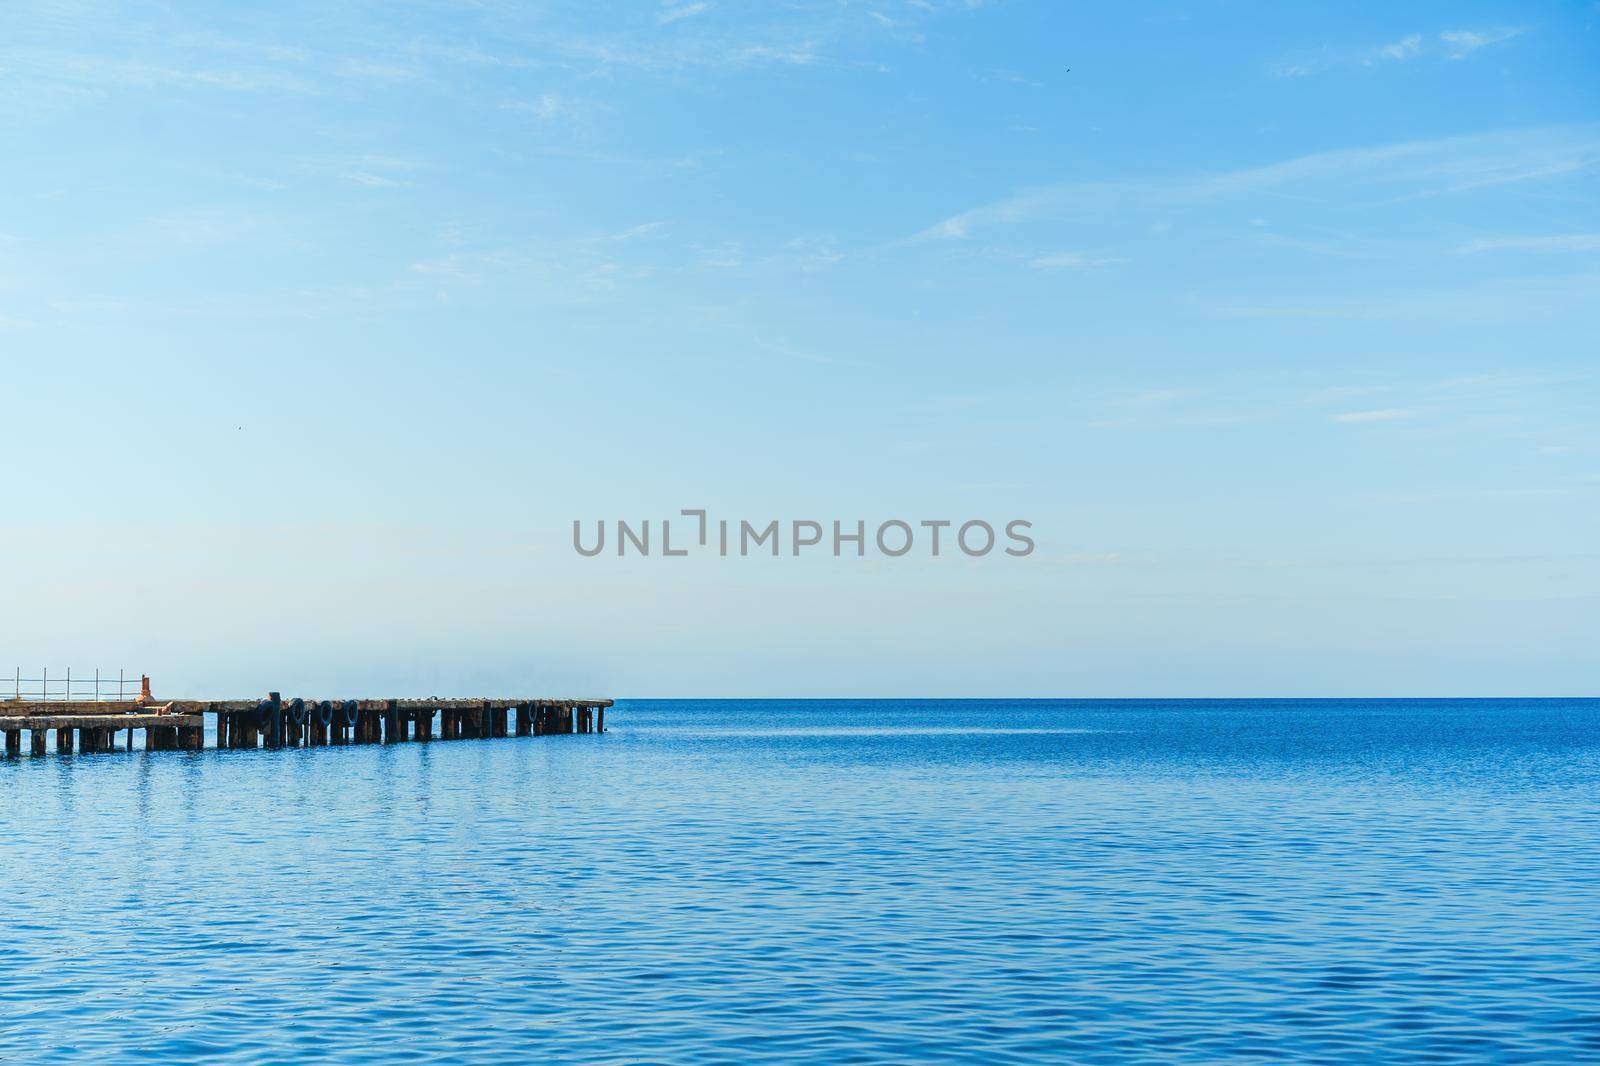 Long pier on the sea with no people, background